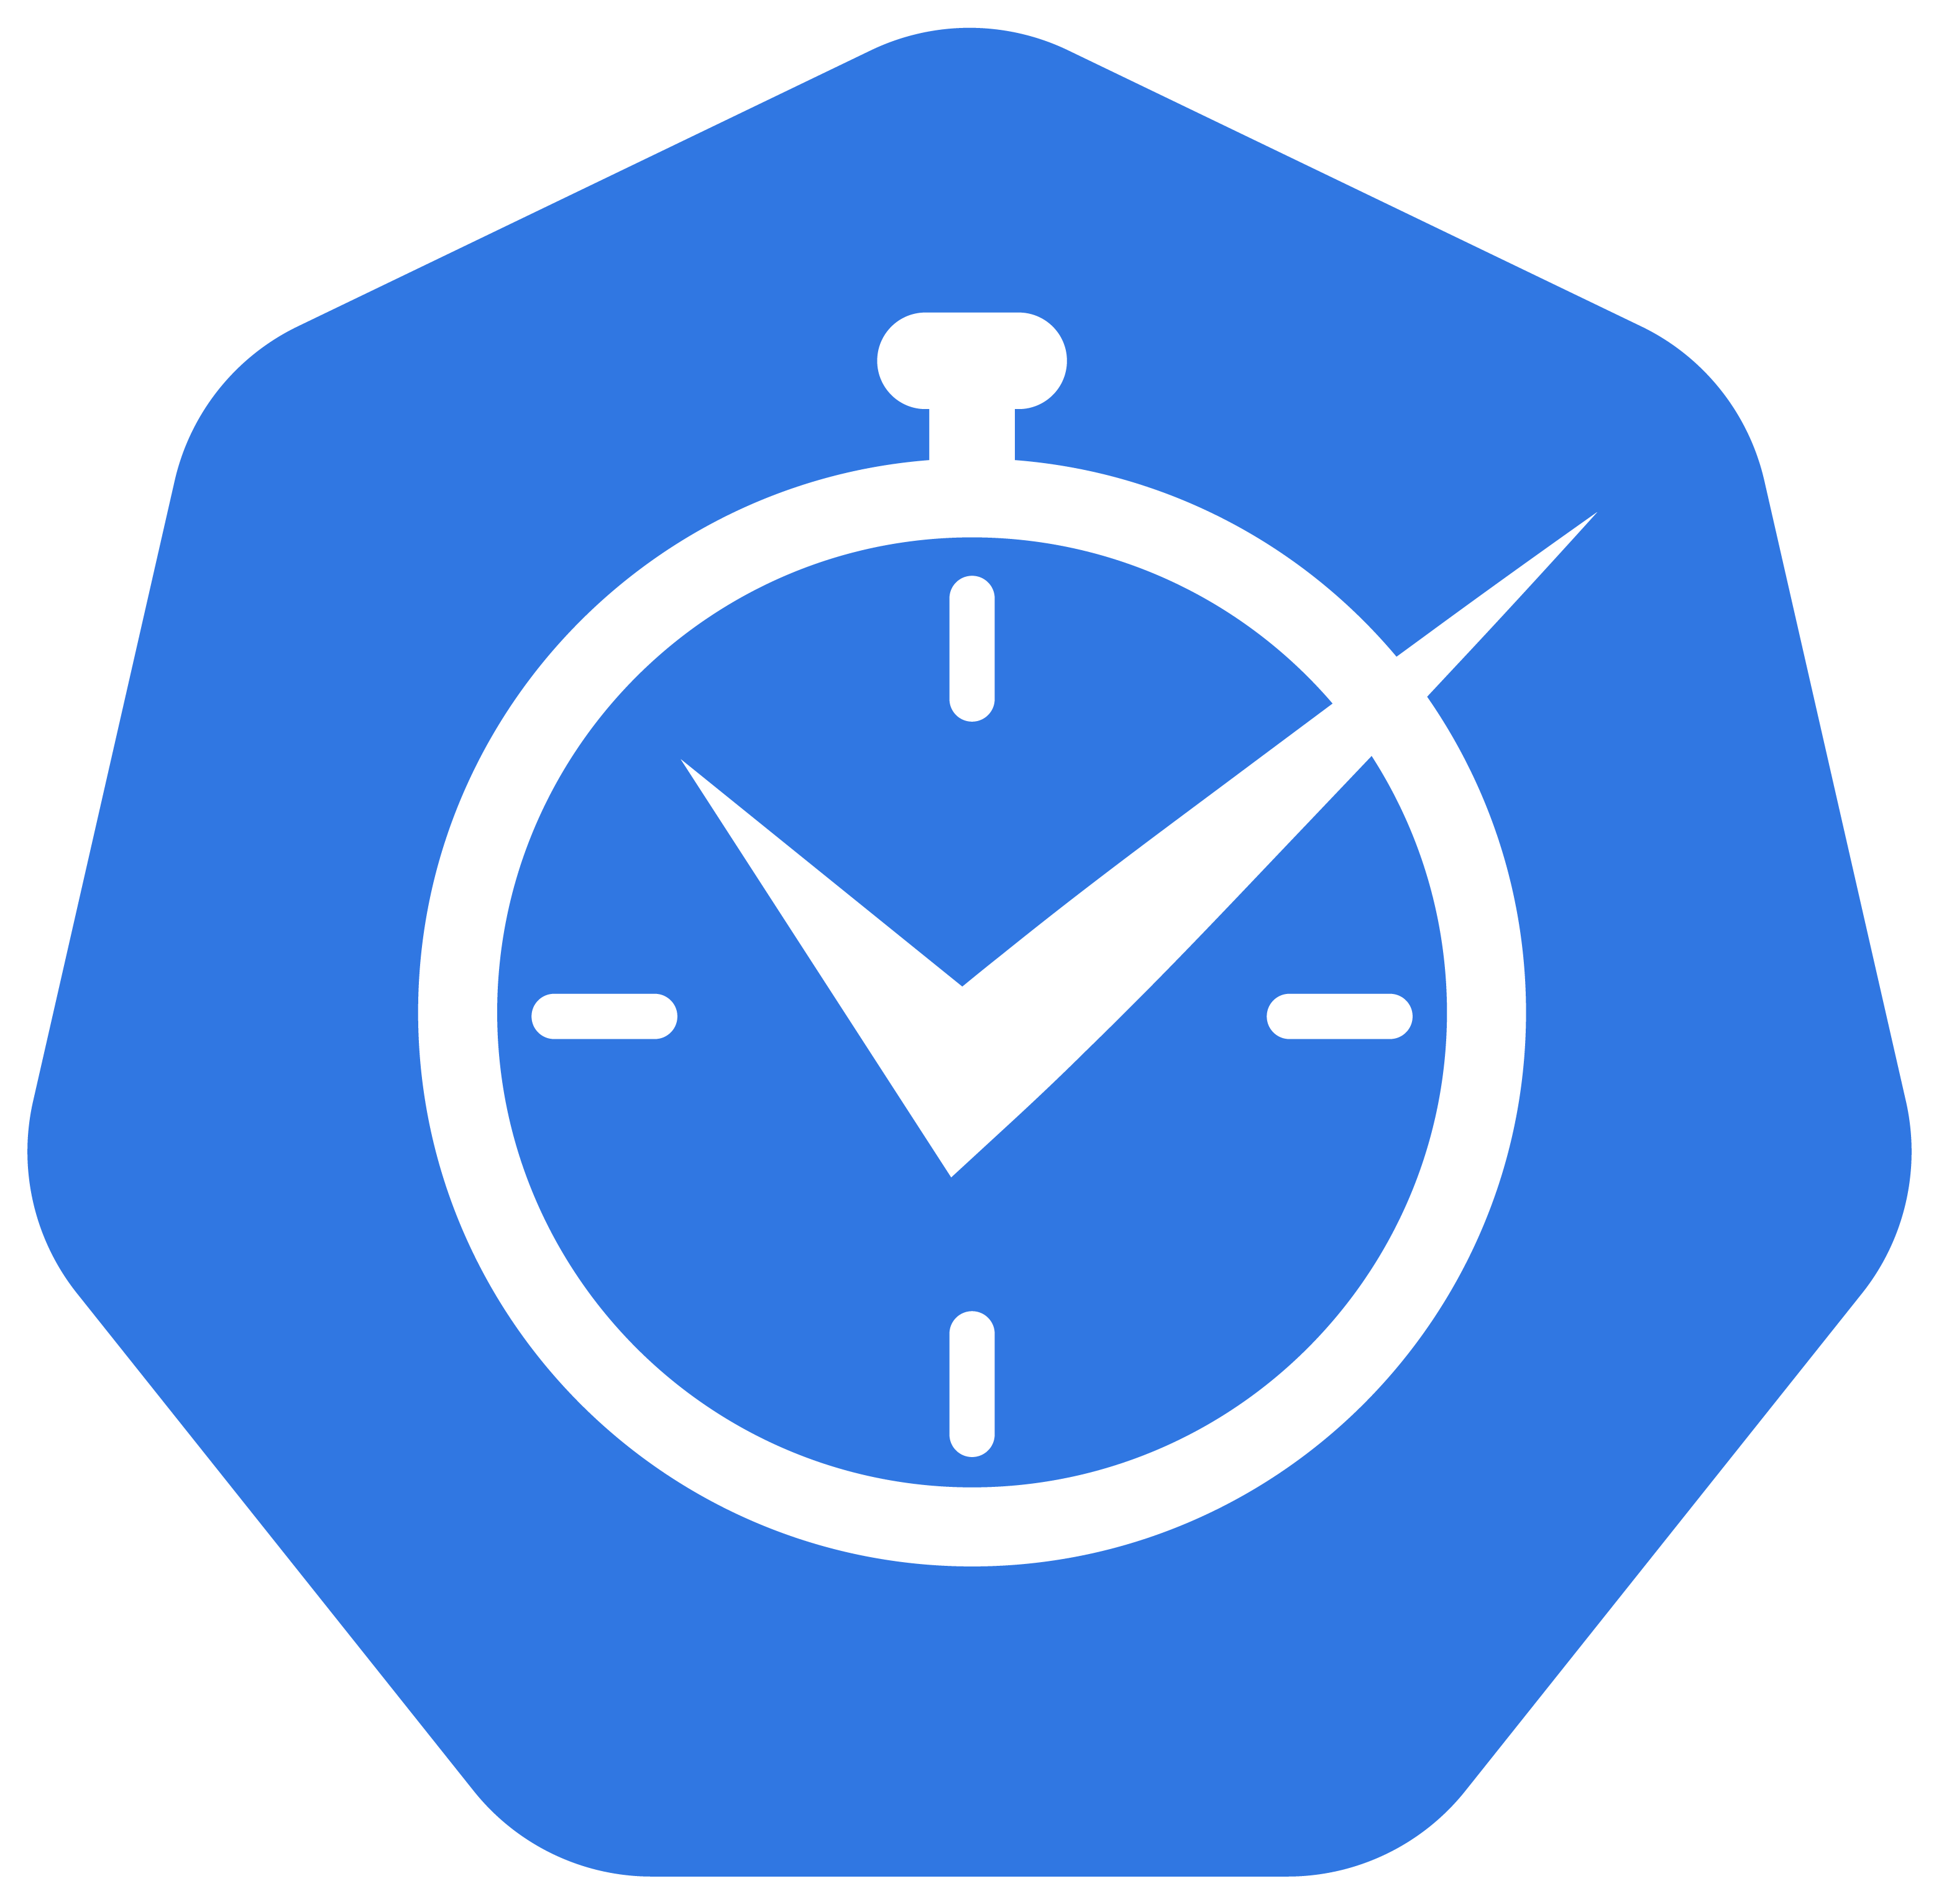 k8tz logo, the k8s logo but with a watch in the center instead of the ship wheel